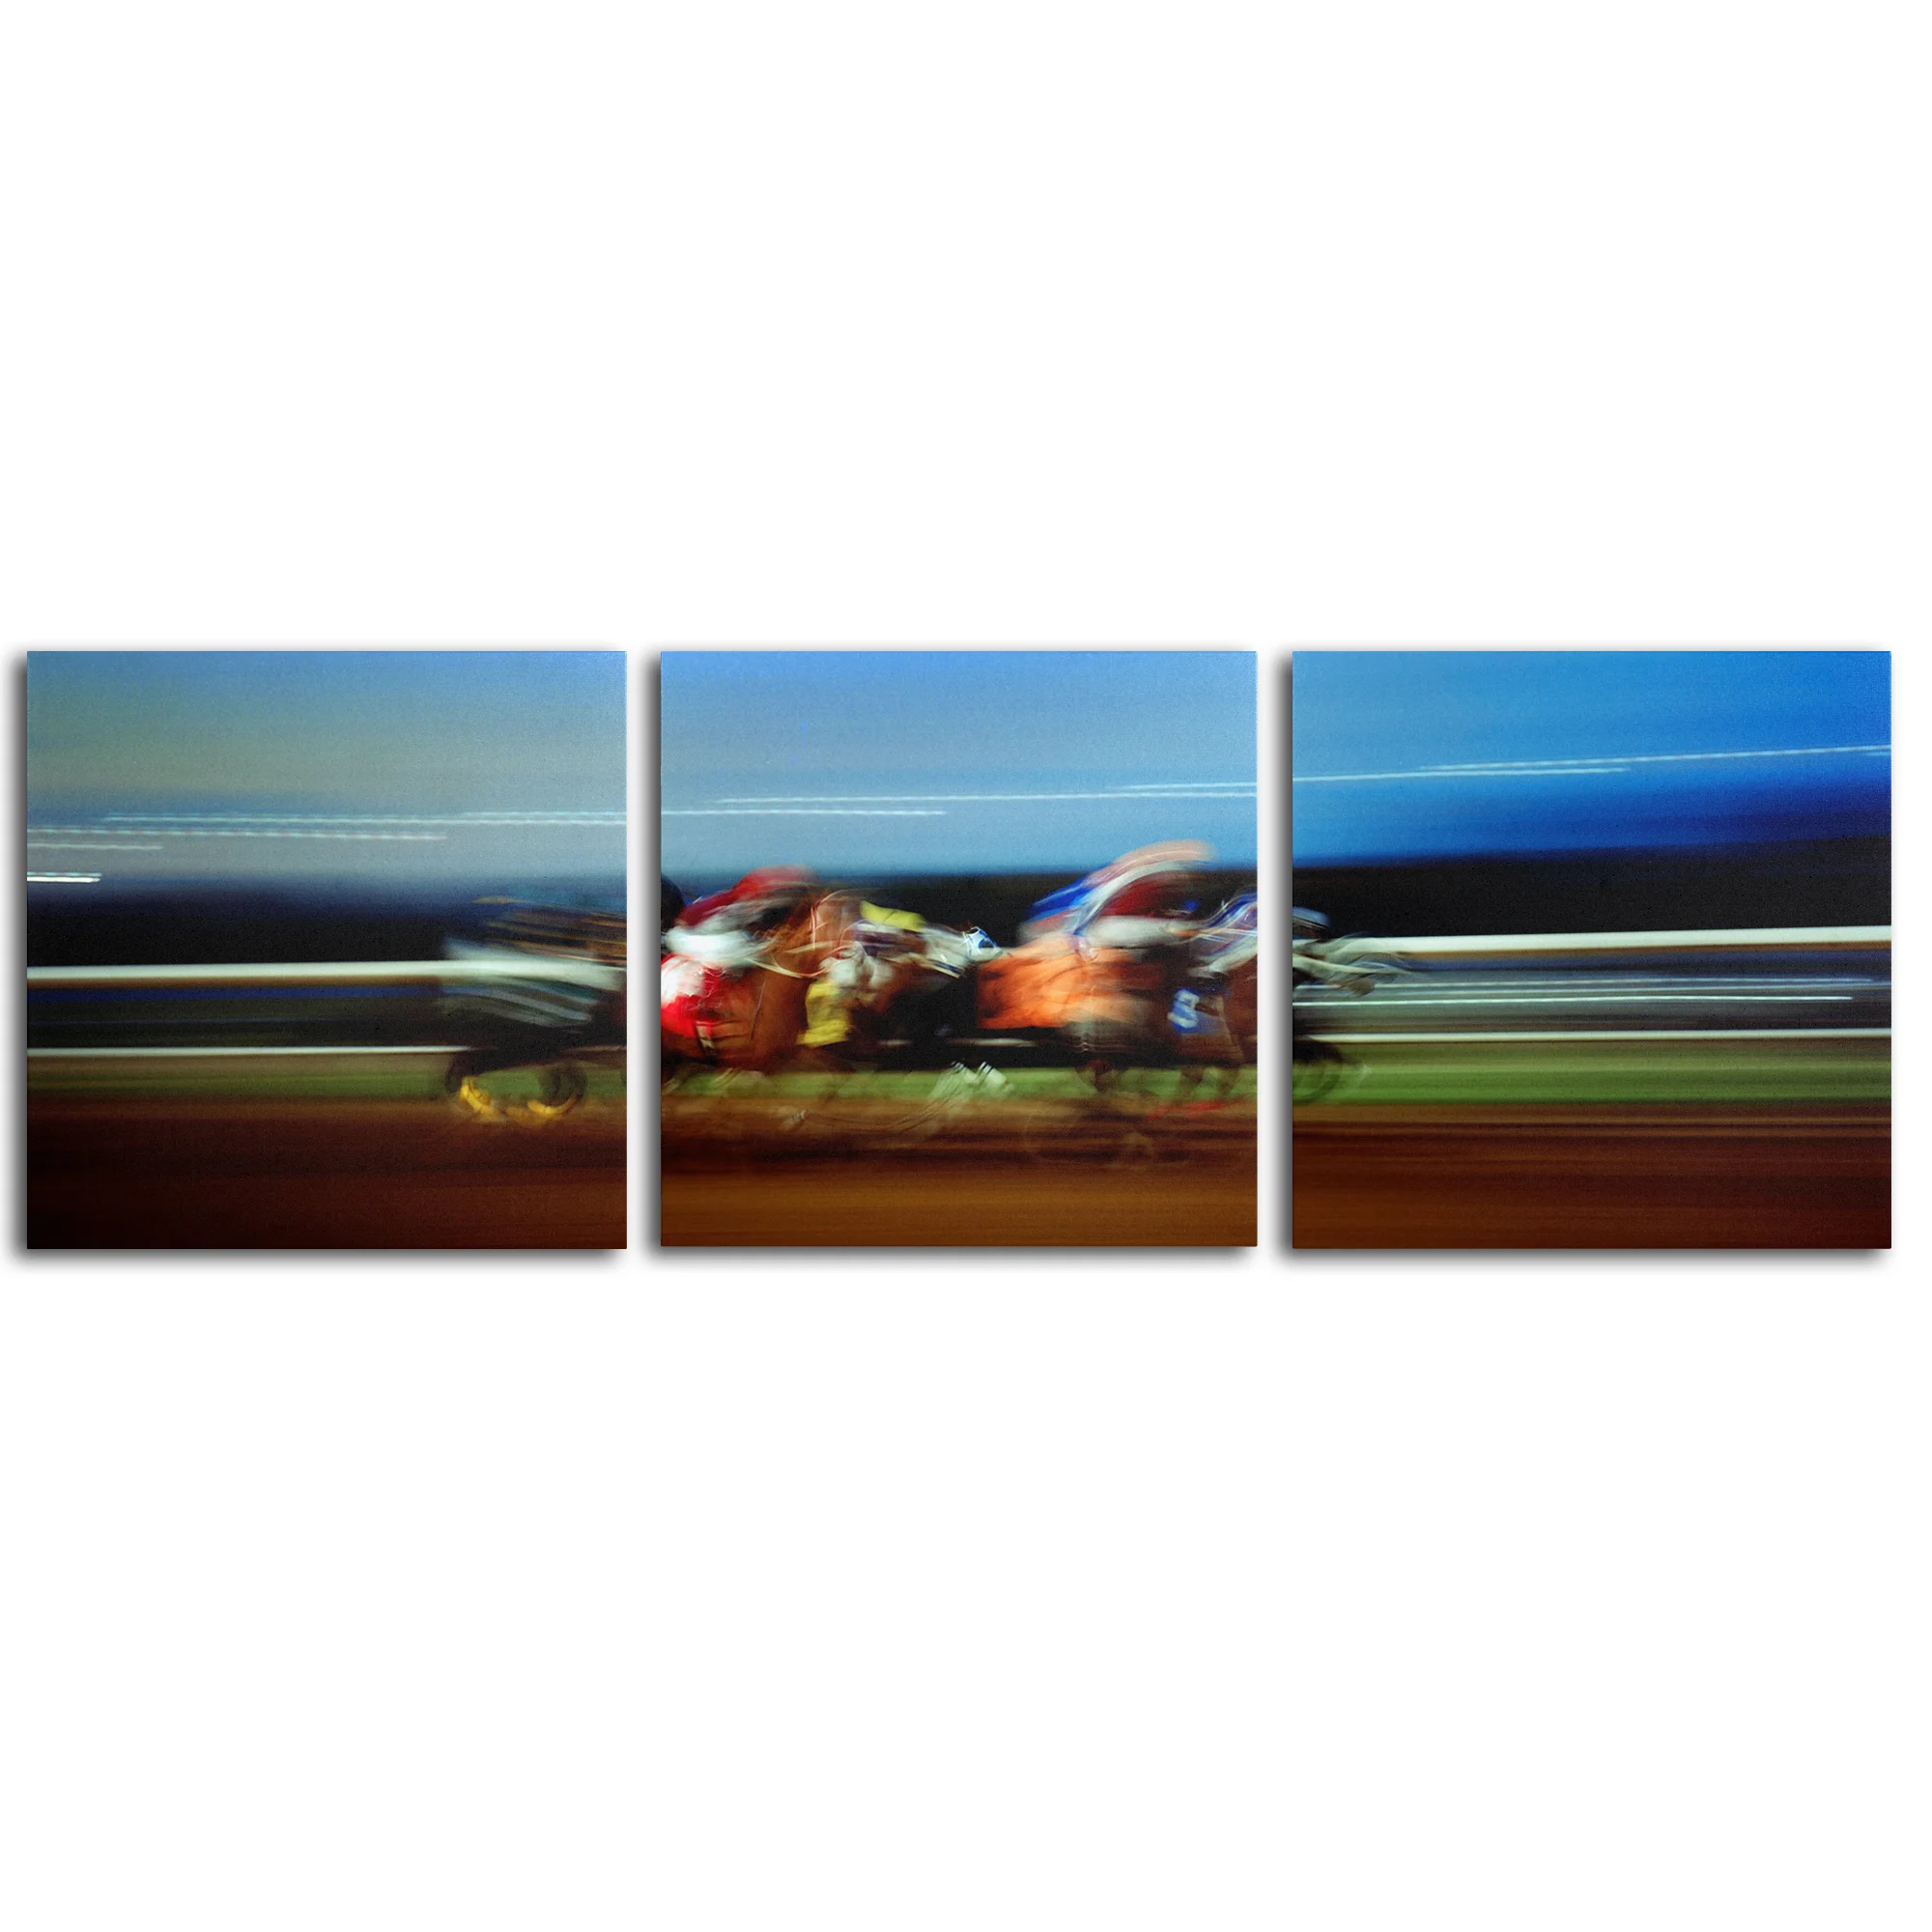 Finish Line by Preston set of 3 - 18x18 Ready to Hang!